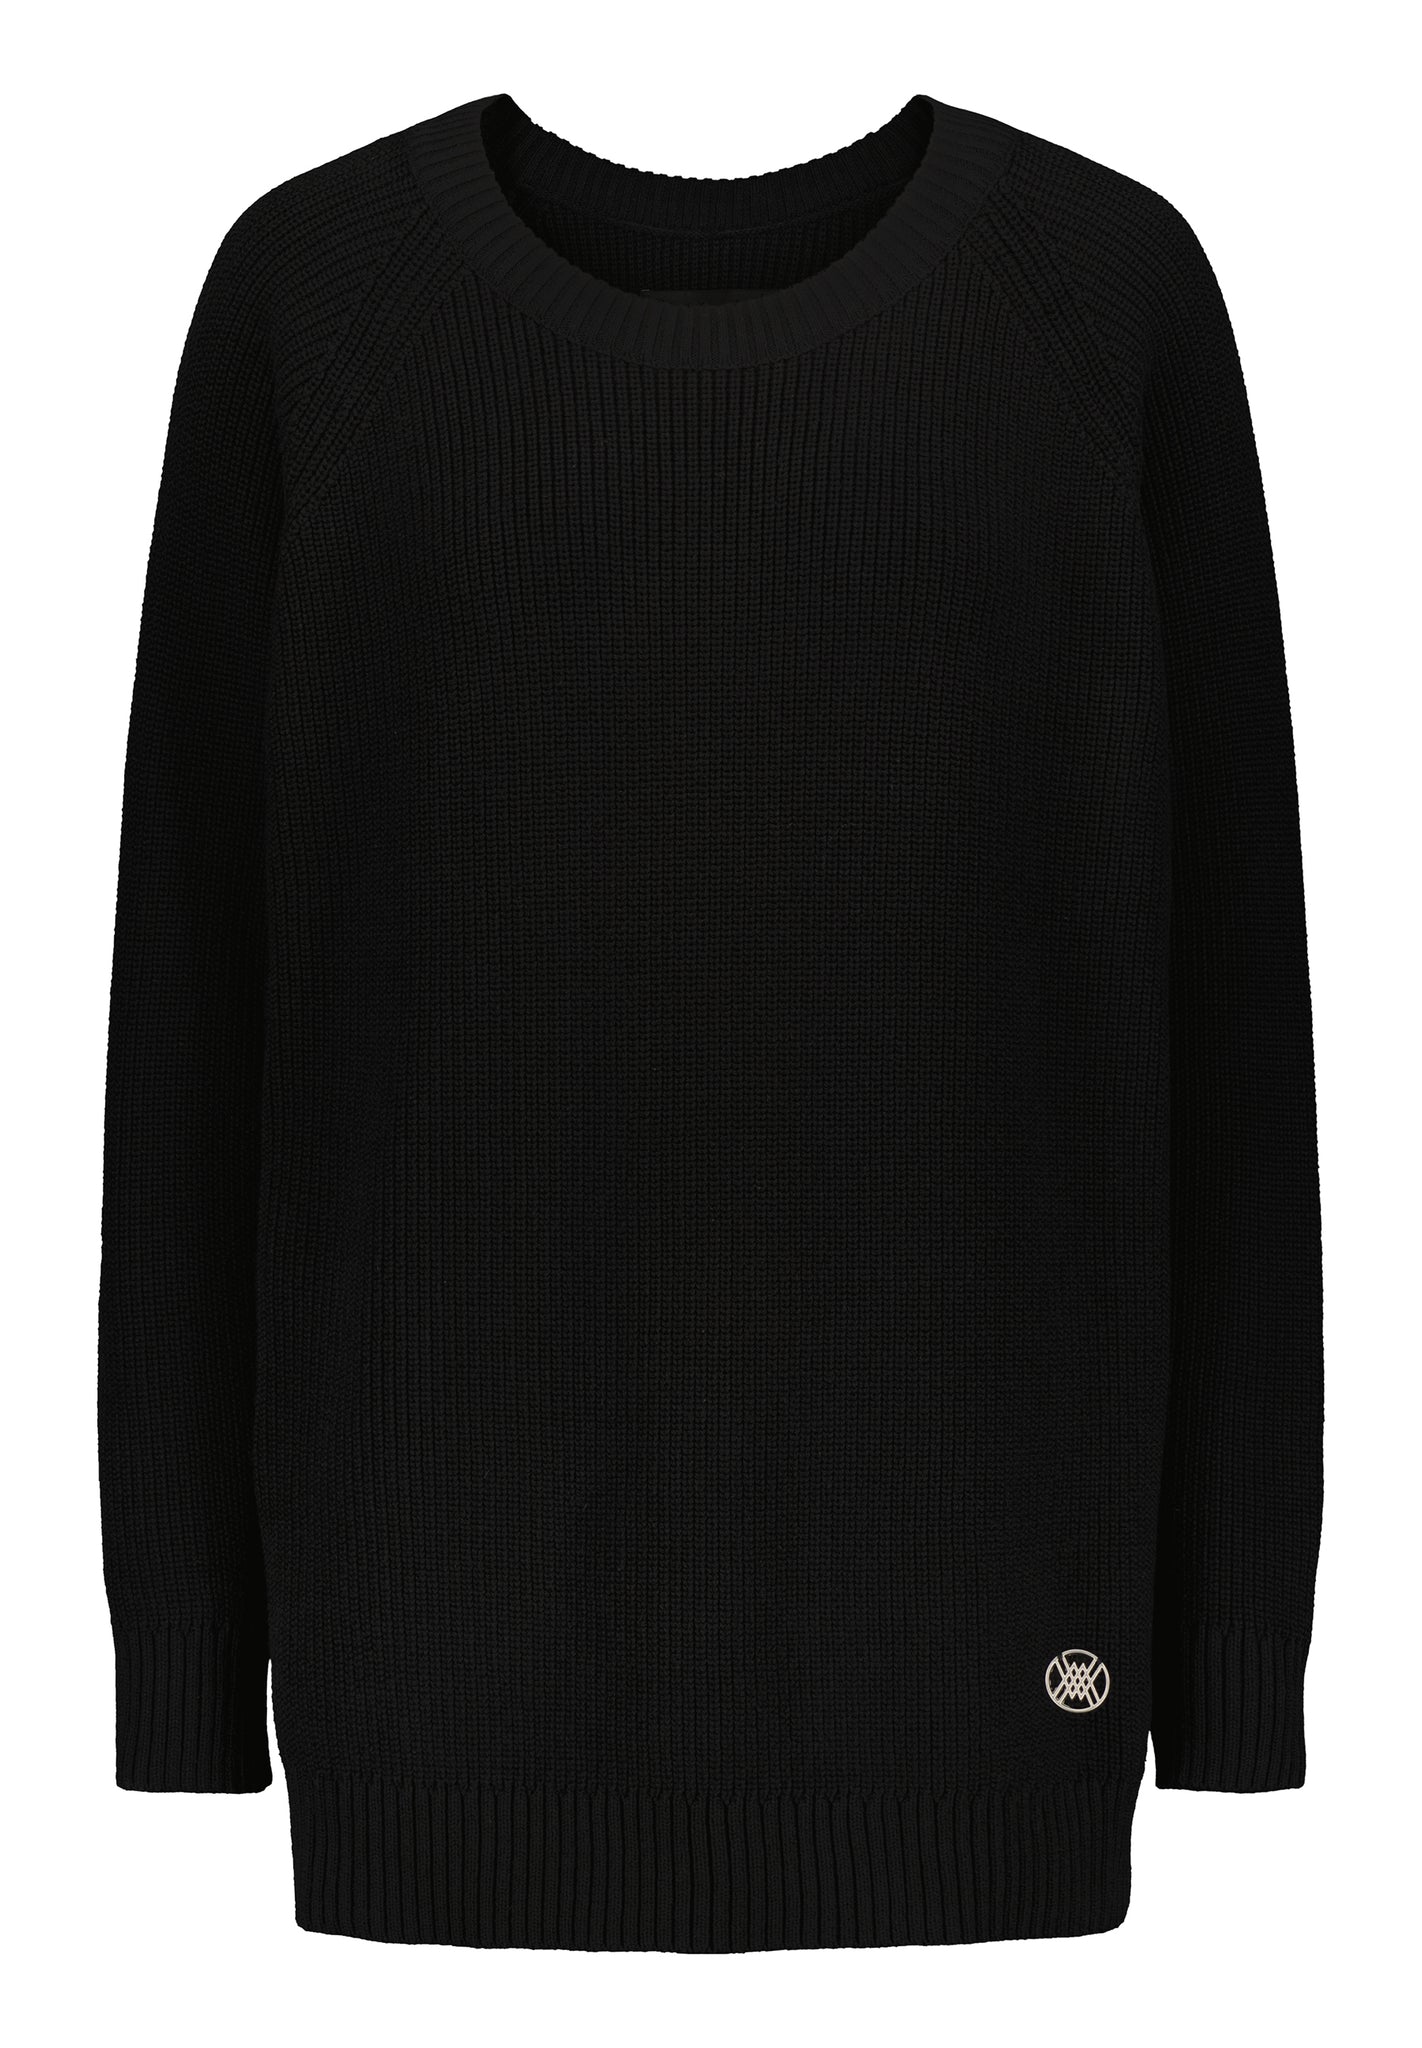 JAMISON KNITTED SWEATER  -  Black